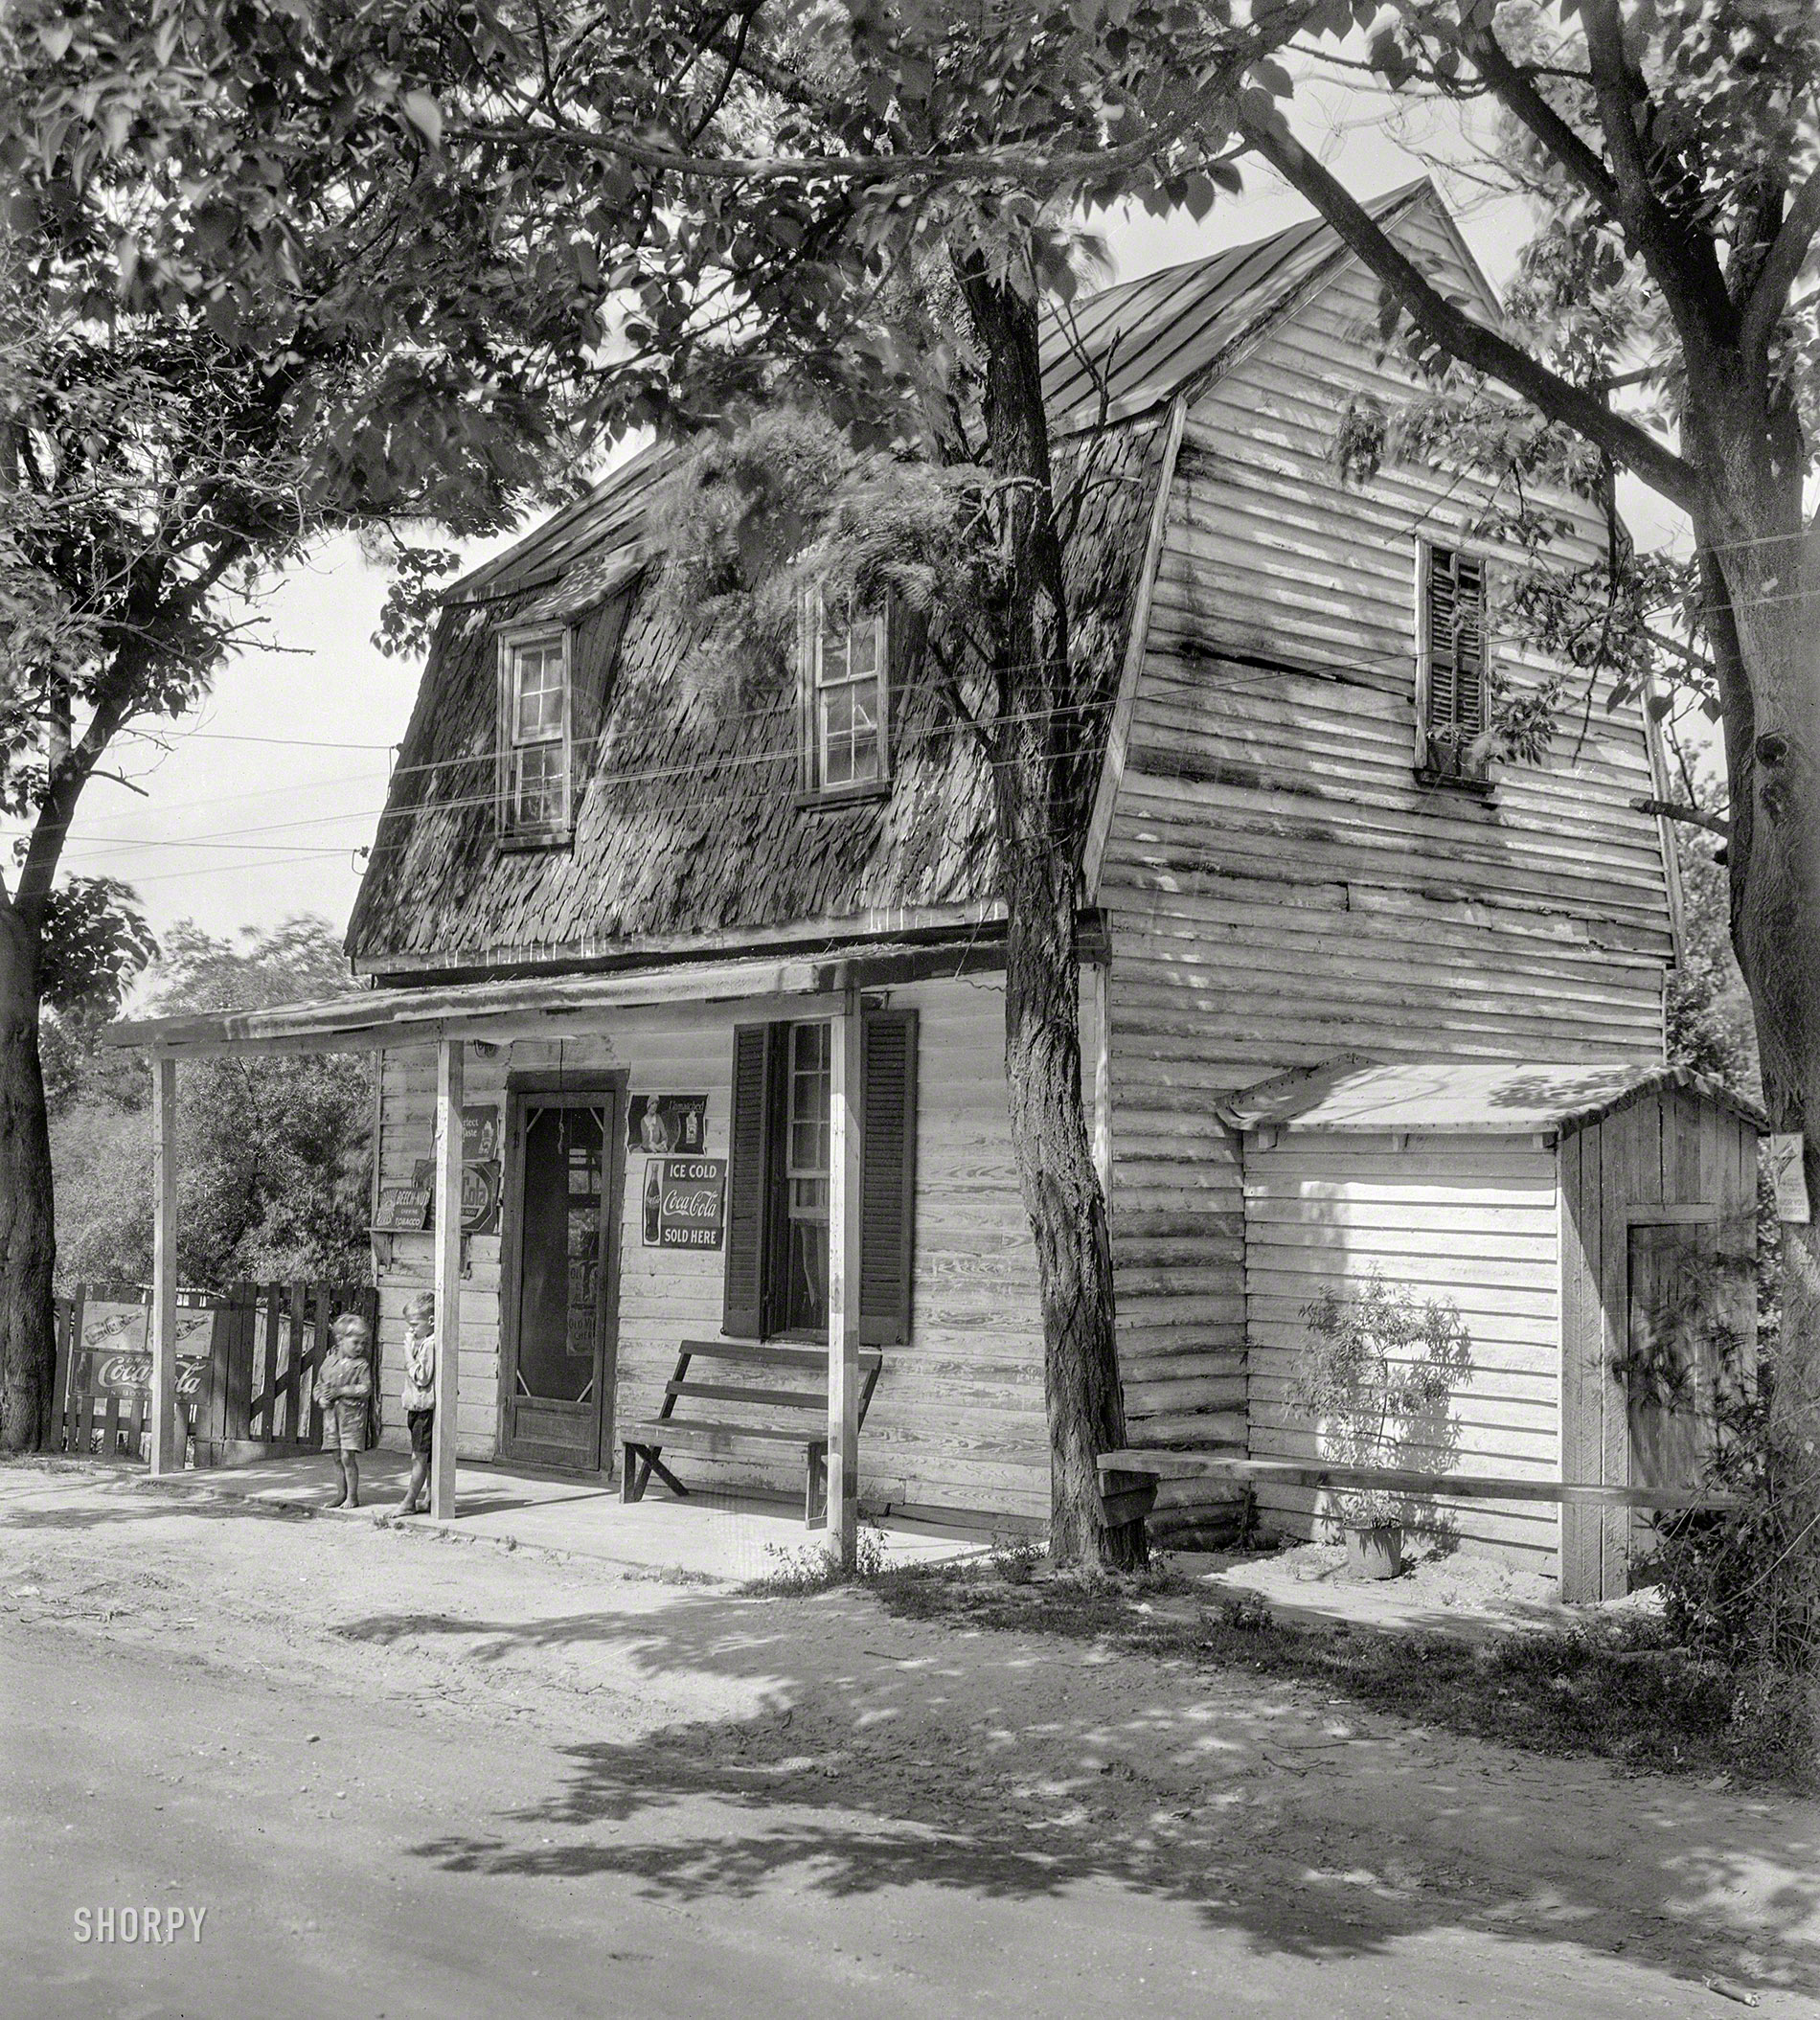 Circa 1928. "Mrs. Ellis's store, Falmouth, Stafford County, Va." Welcome to the Nicotine & Caffeine Canteen. Photo by Frances B. Johnston. View full size.